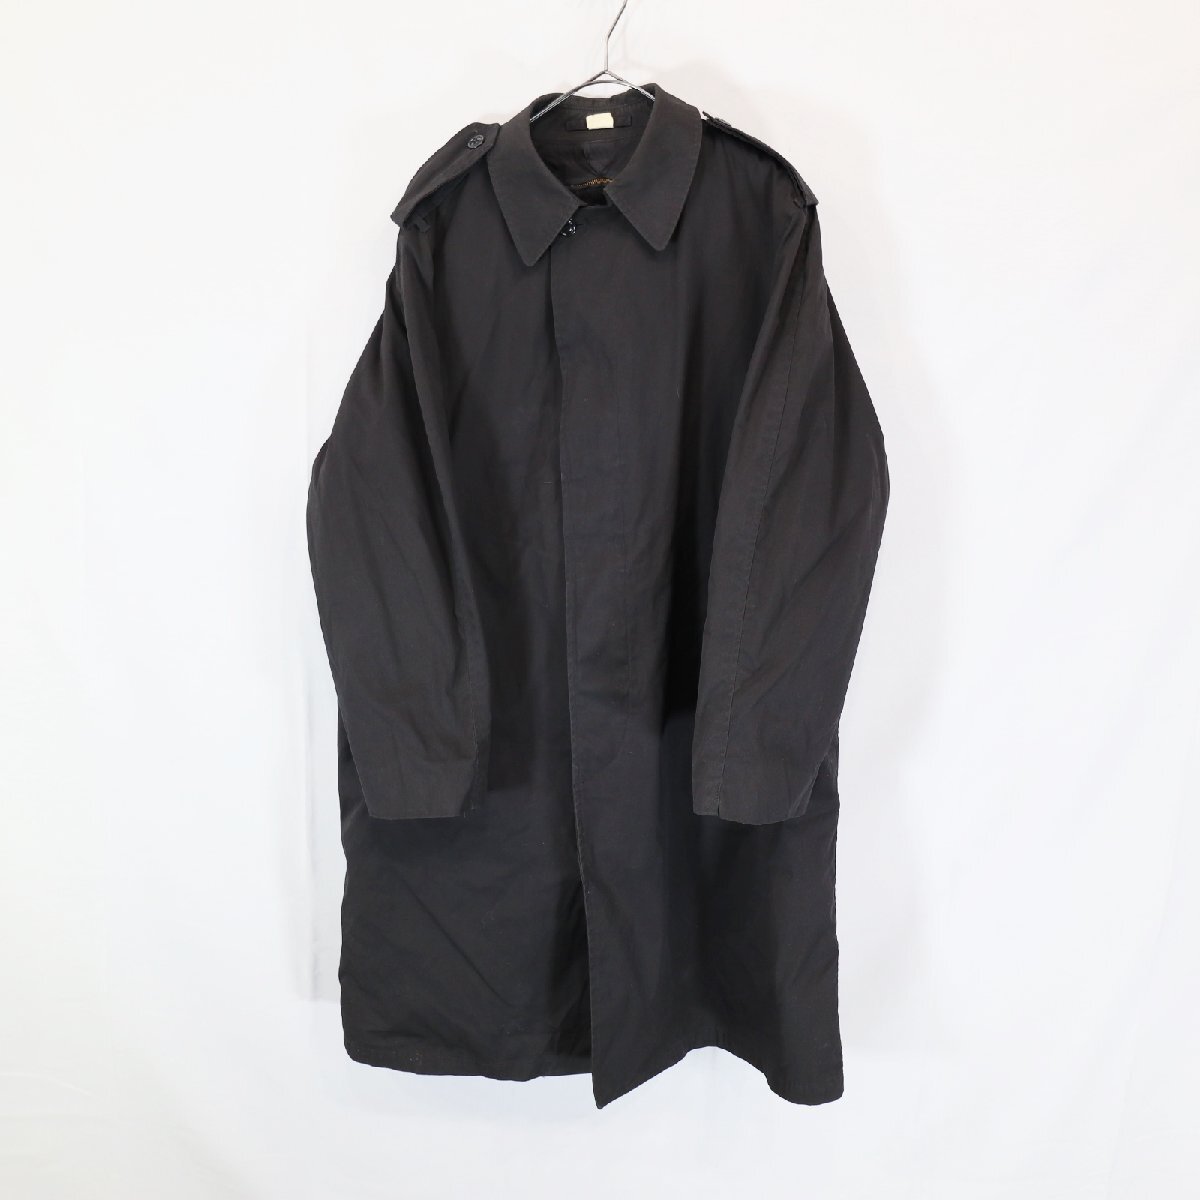 80 period U.S.MILITARY all weather coat military America army military uniform outer long height black ( men's 40S ) M7952 1 jpy start 